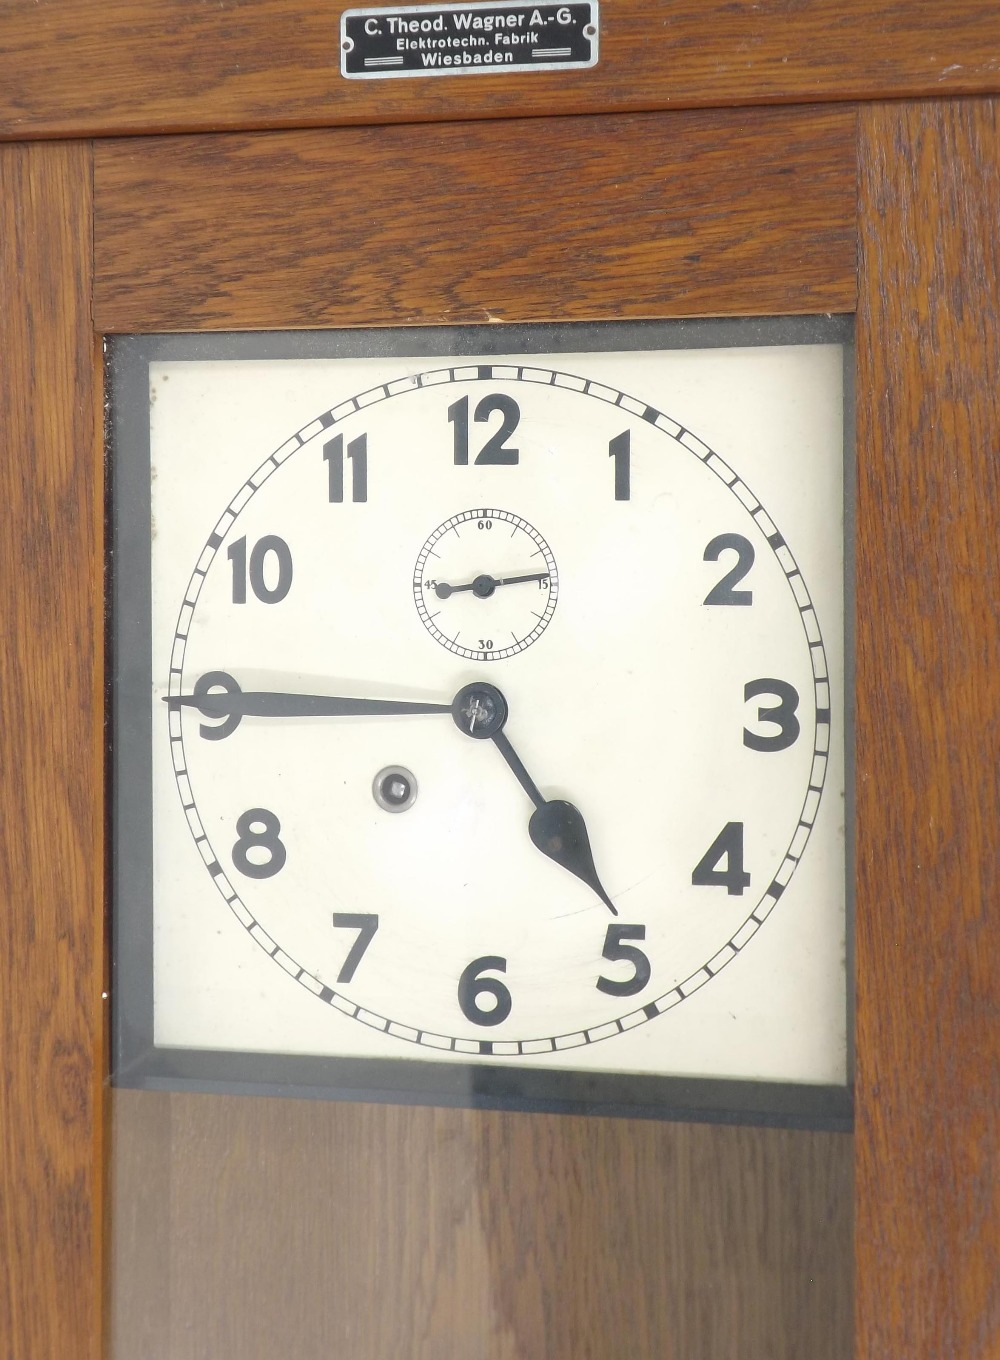 Two C. Theod. Wagner mechanical wall clocks with provision for contacts to operate electrical slaves - Image 3 of 5